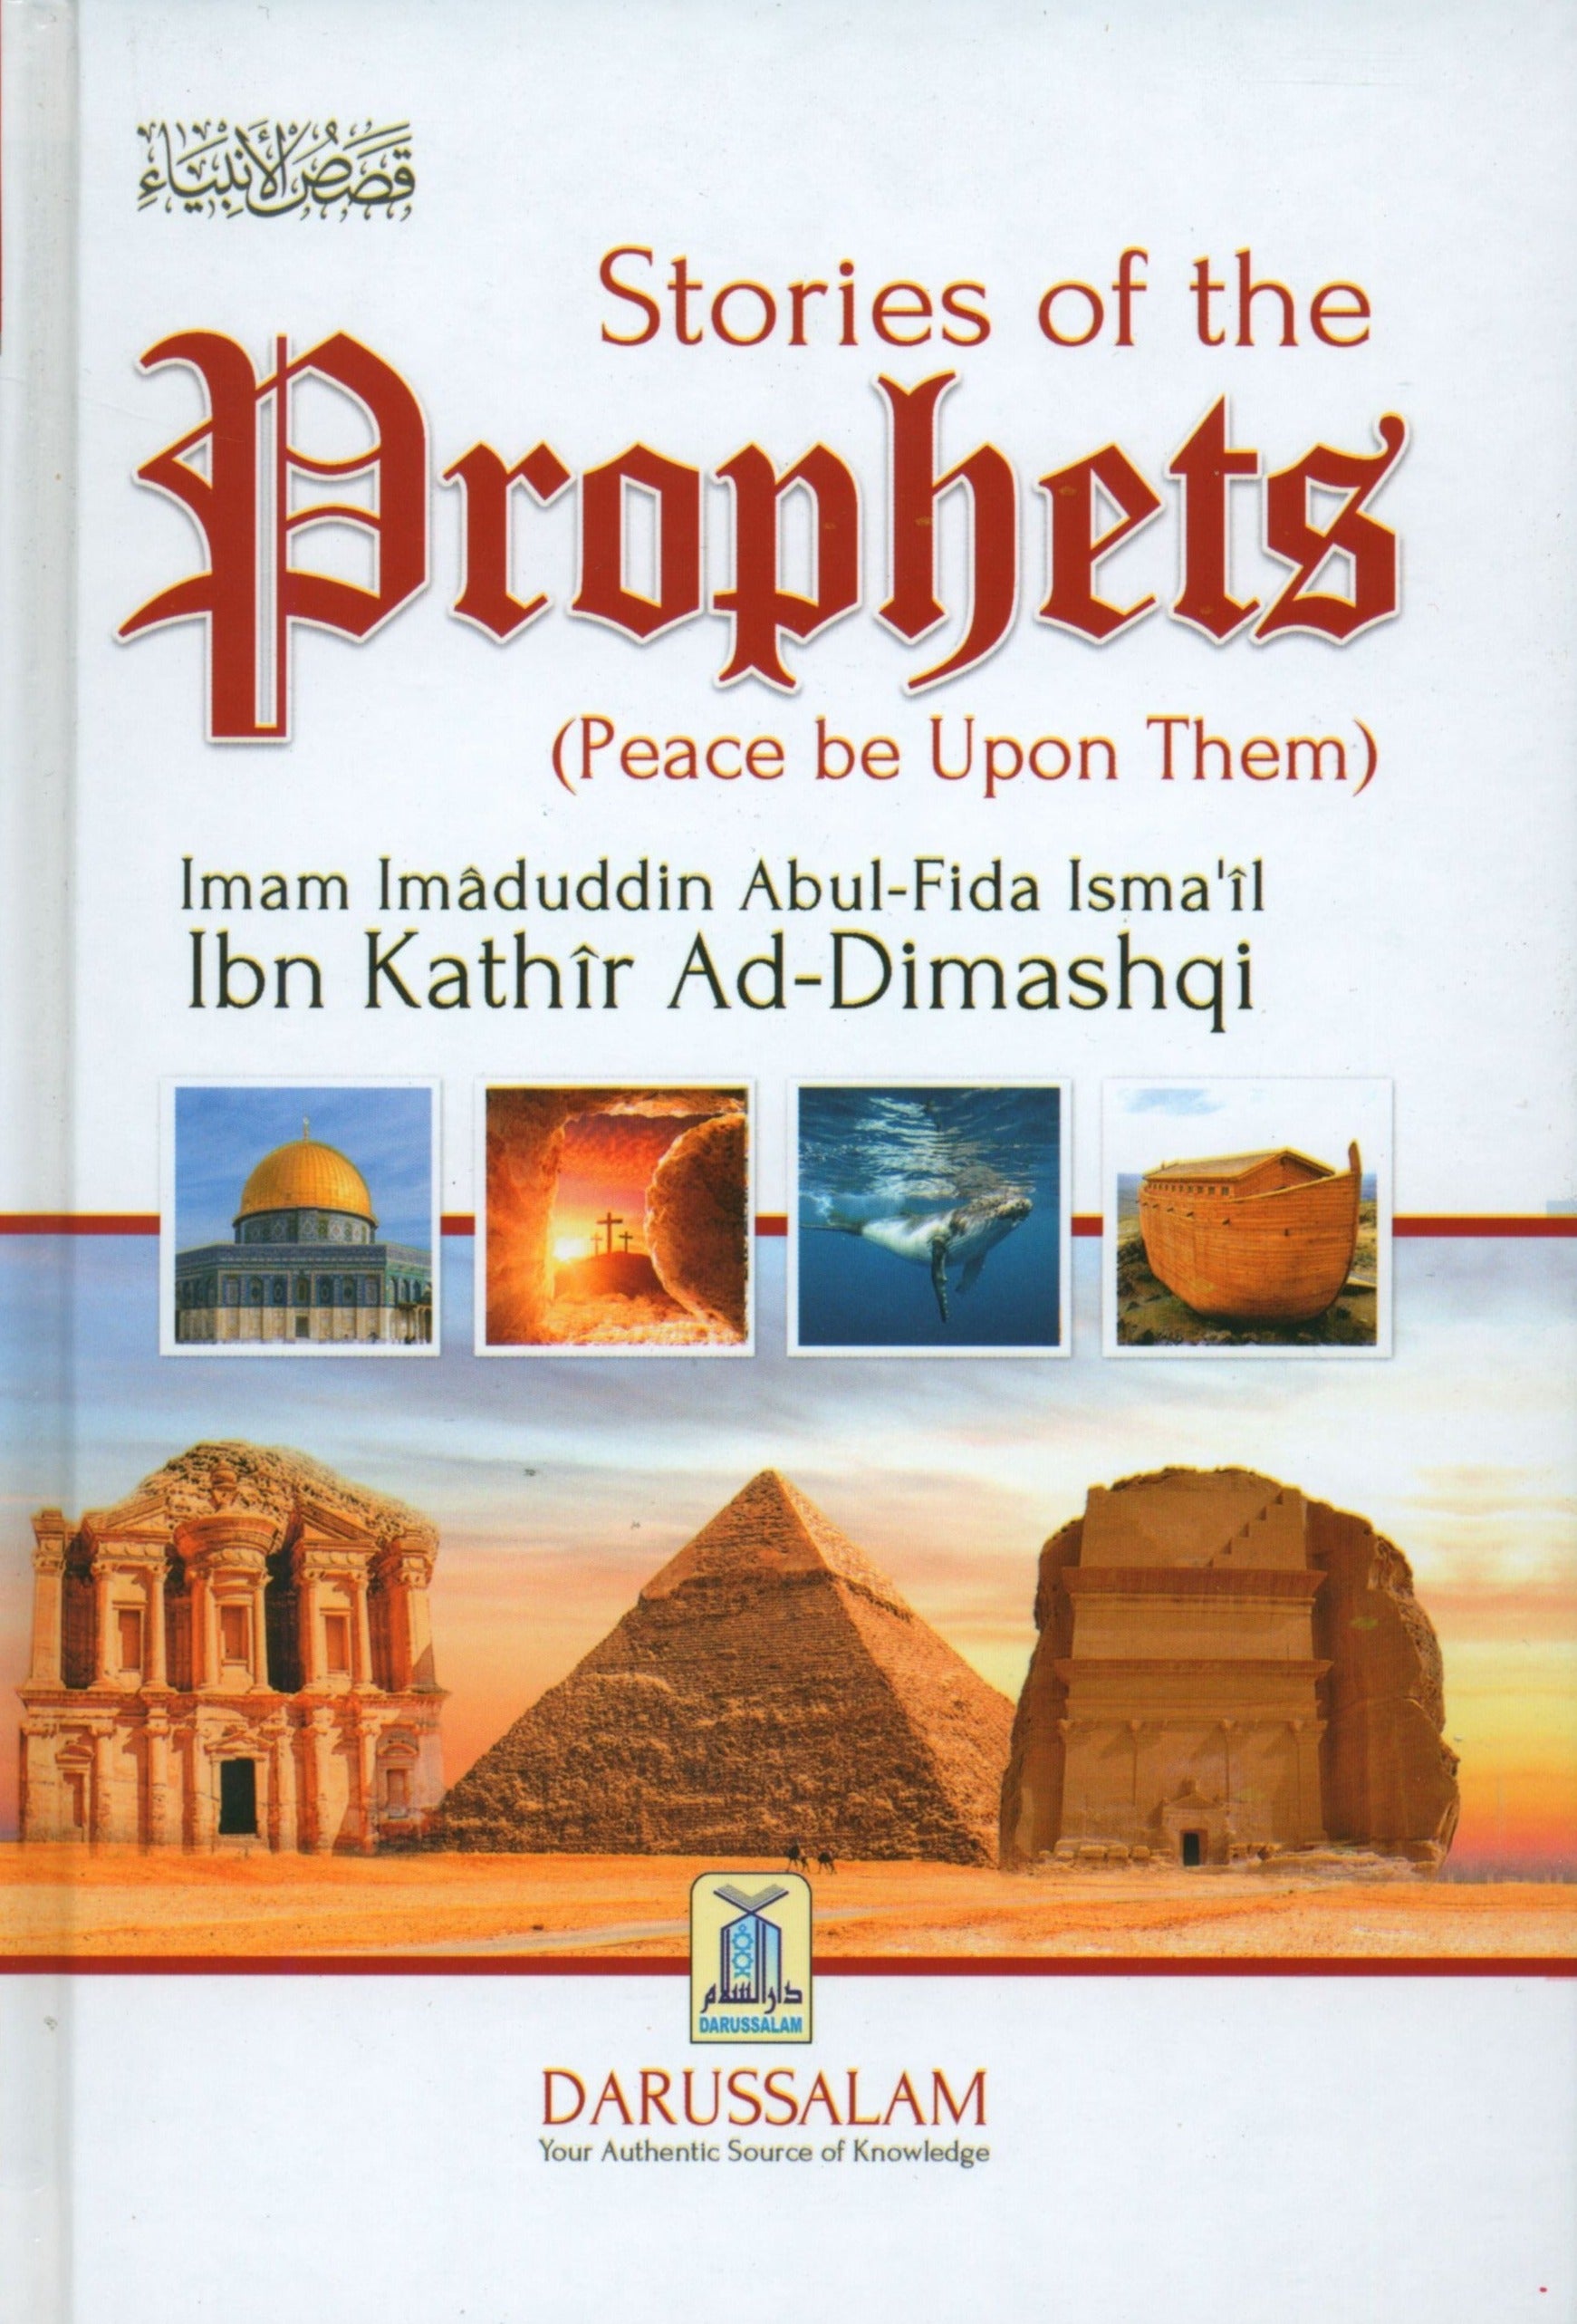 Stories of the Prophets by Darussalam